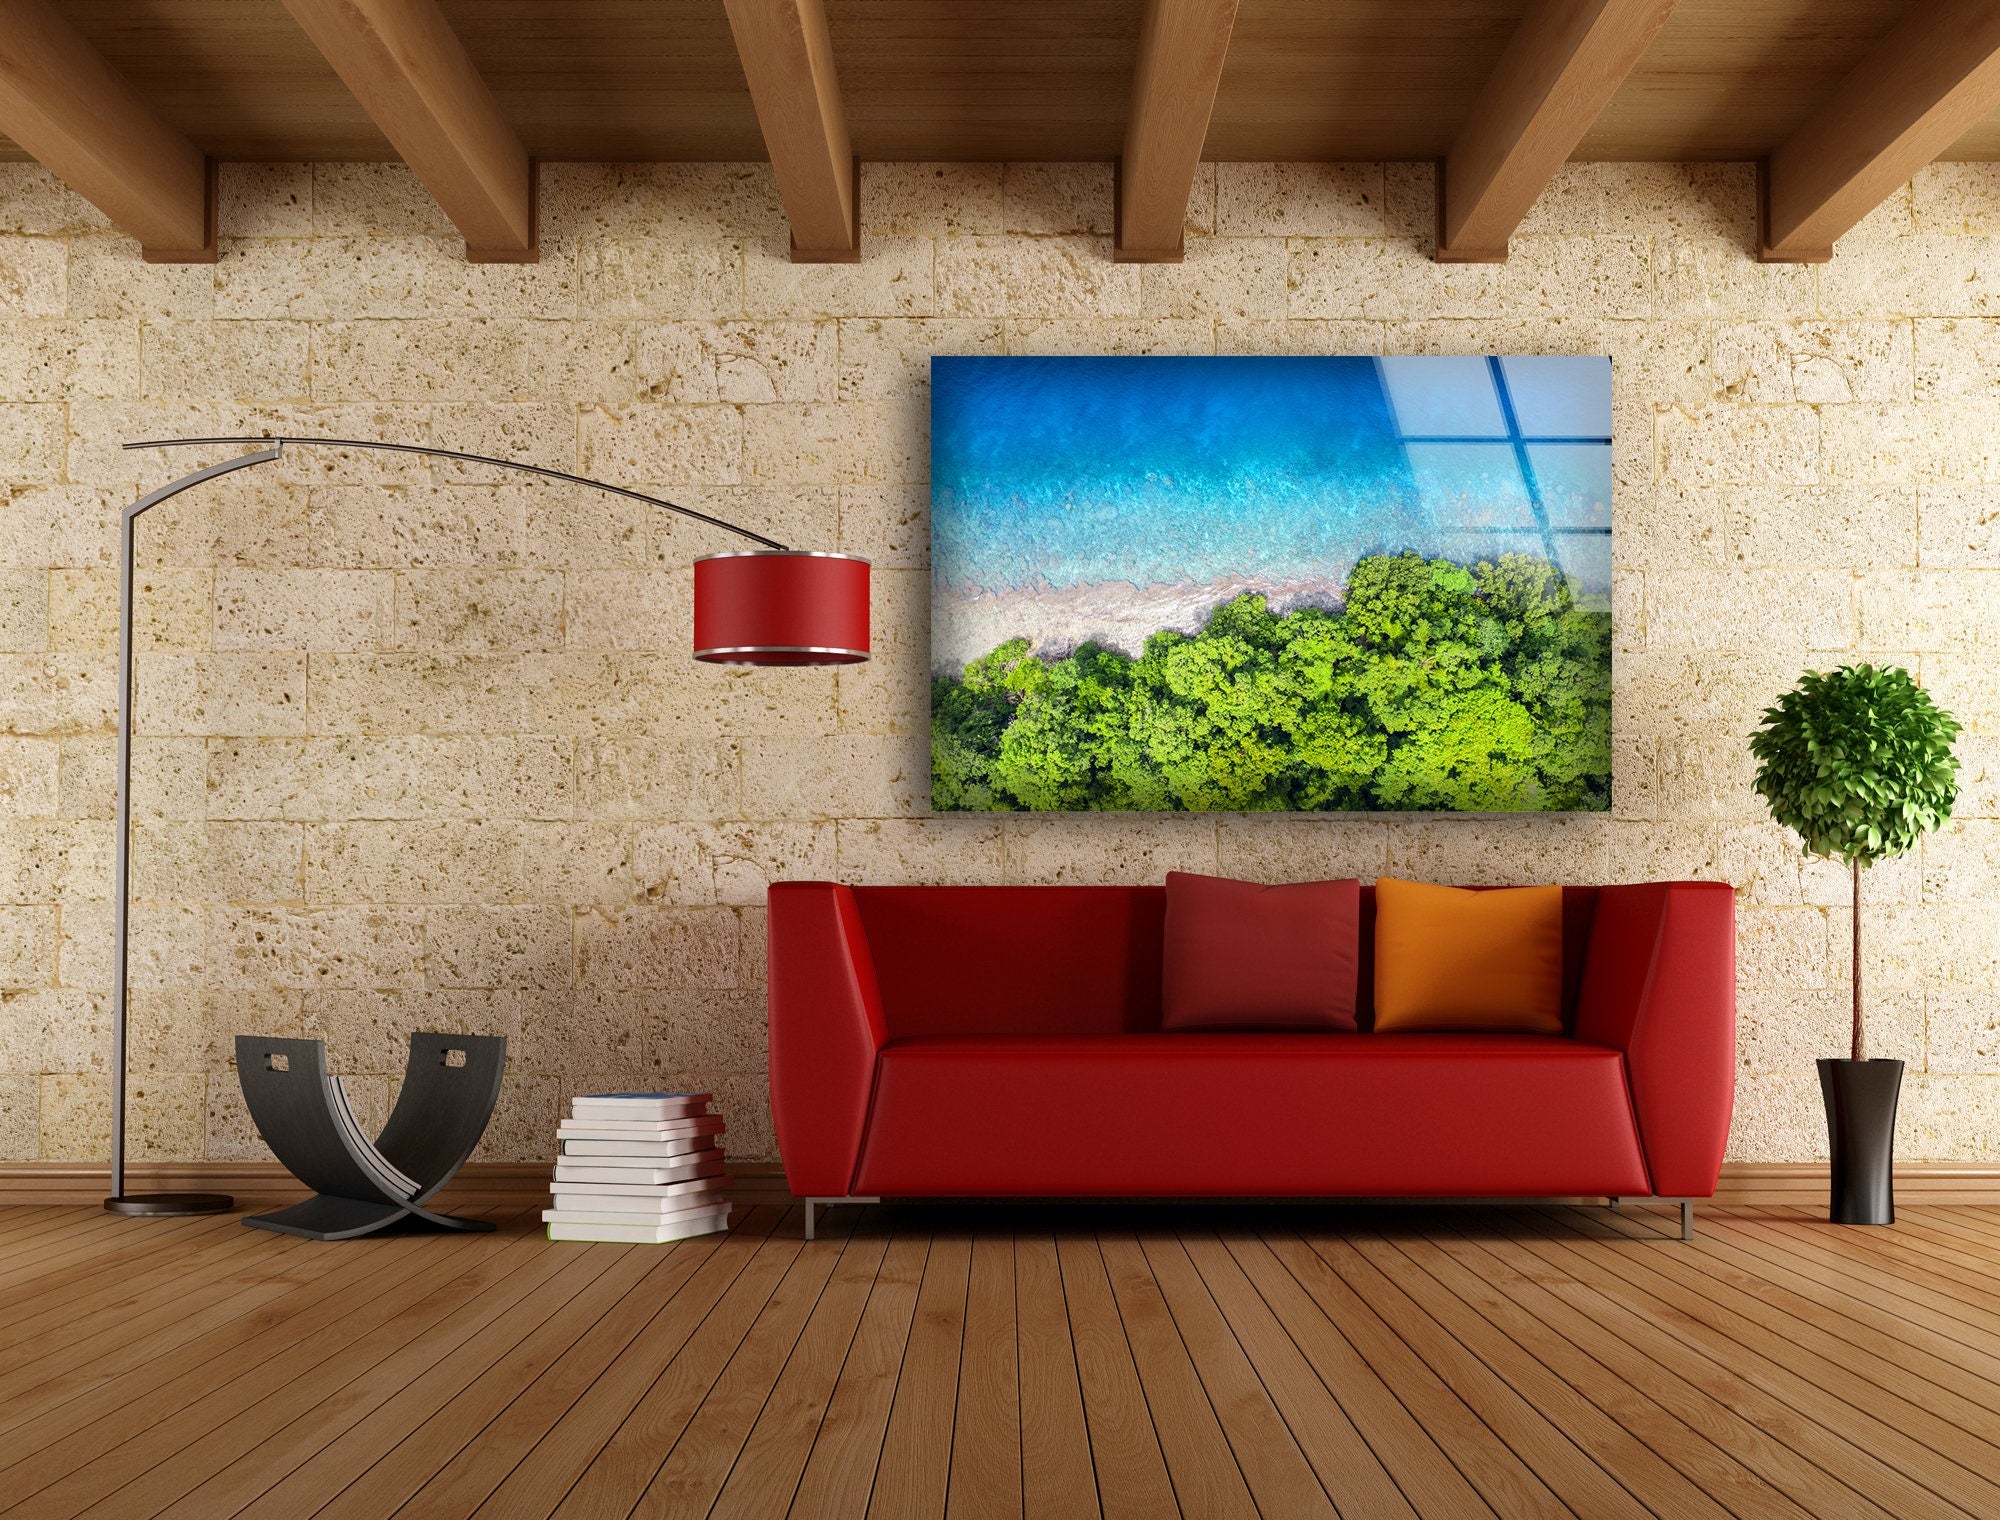 Tropical Islands Nature Tempered Glass Wall Art